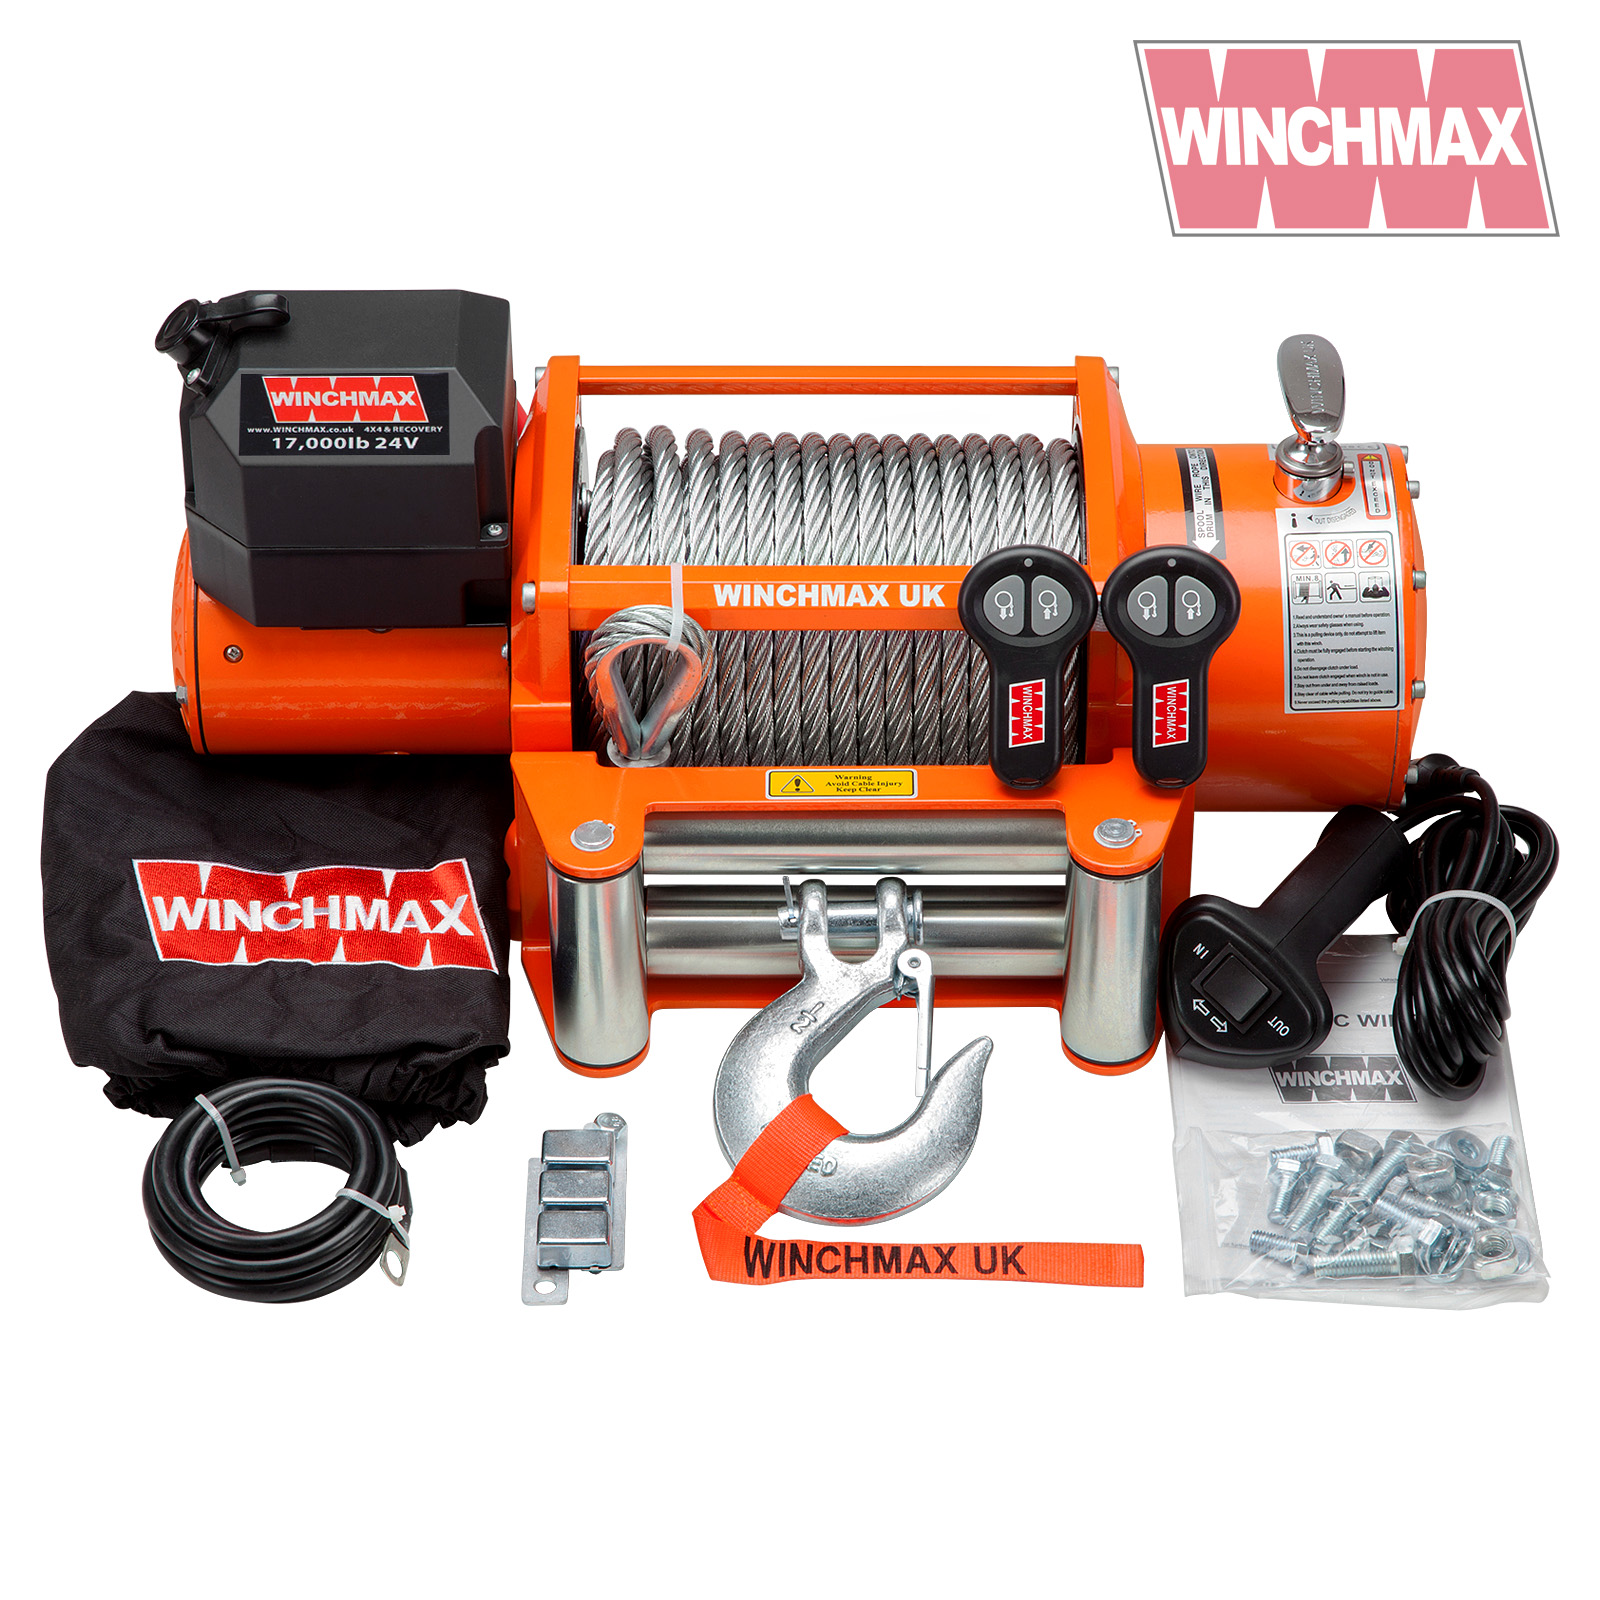 Winchmax 17000lb 24v Winch. Steel Rope and Twin Remote Controls